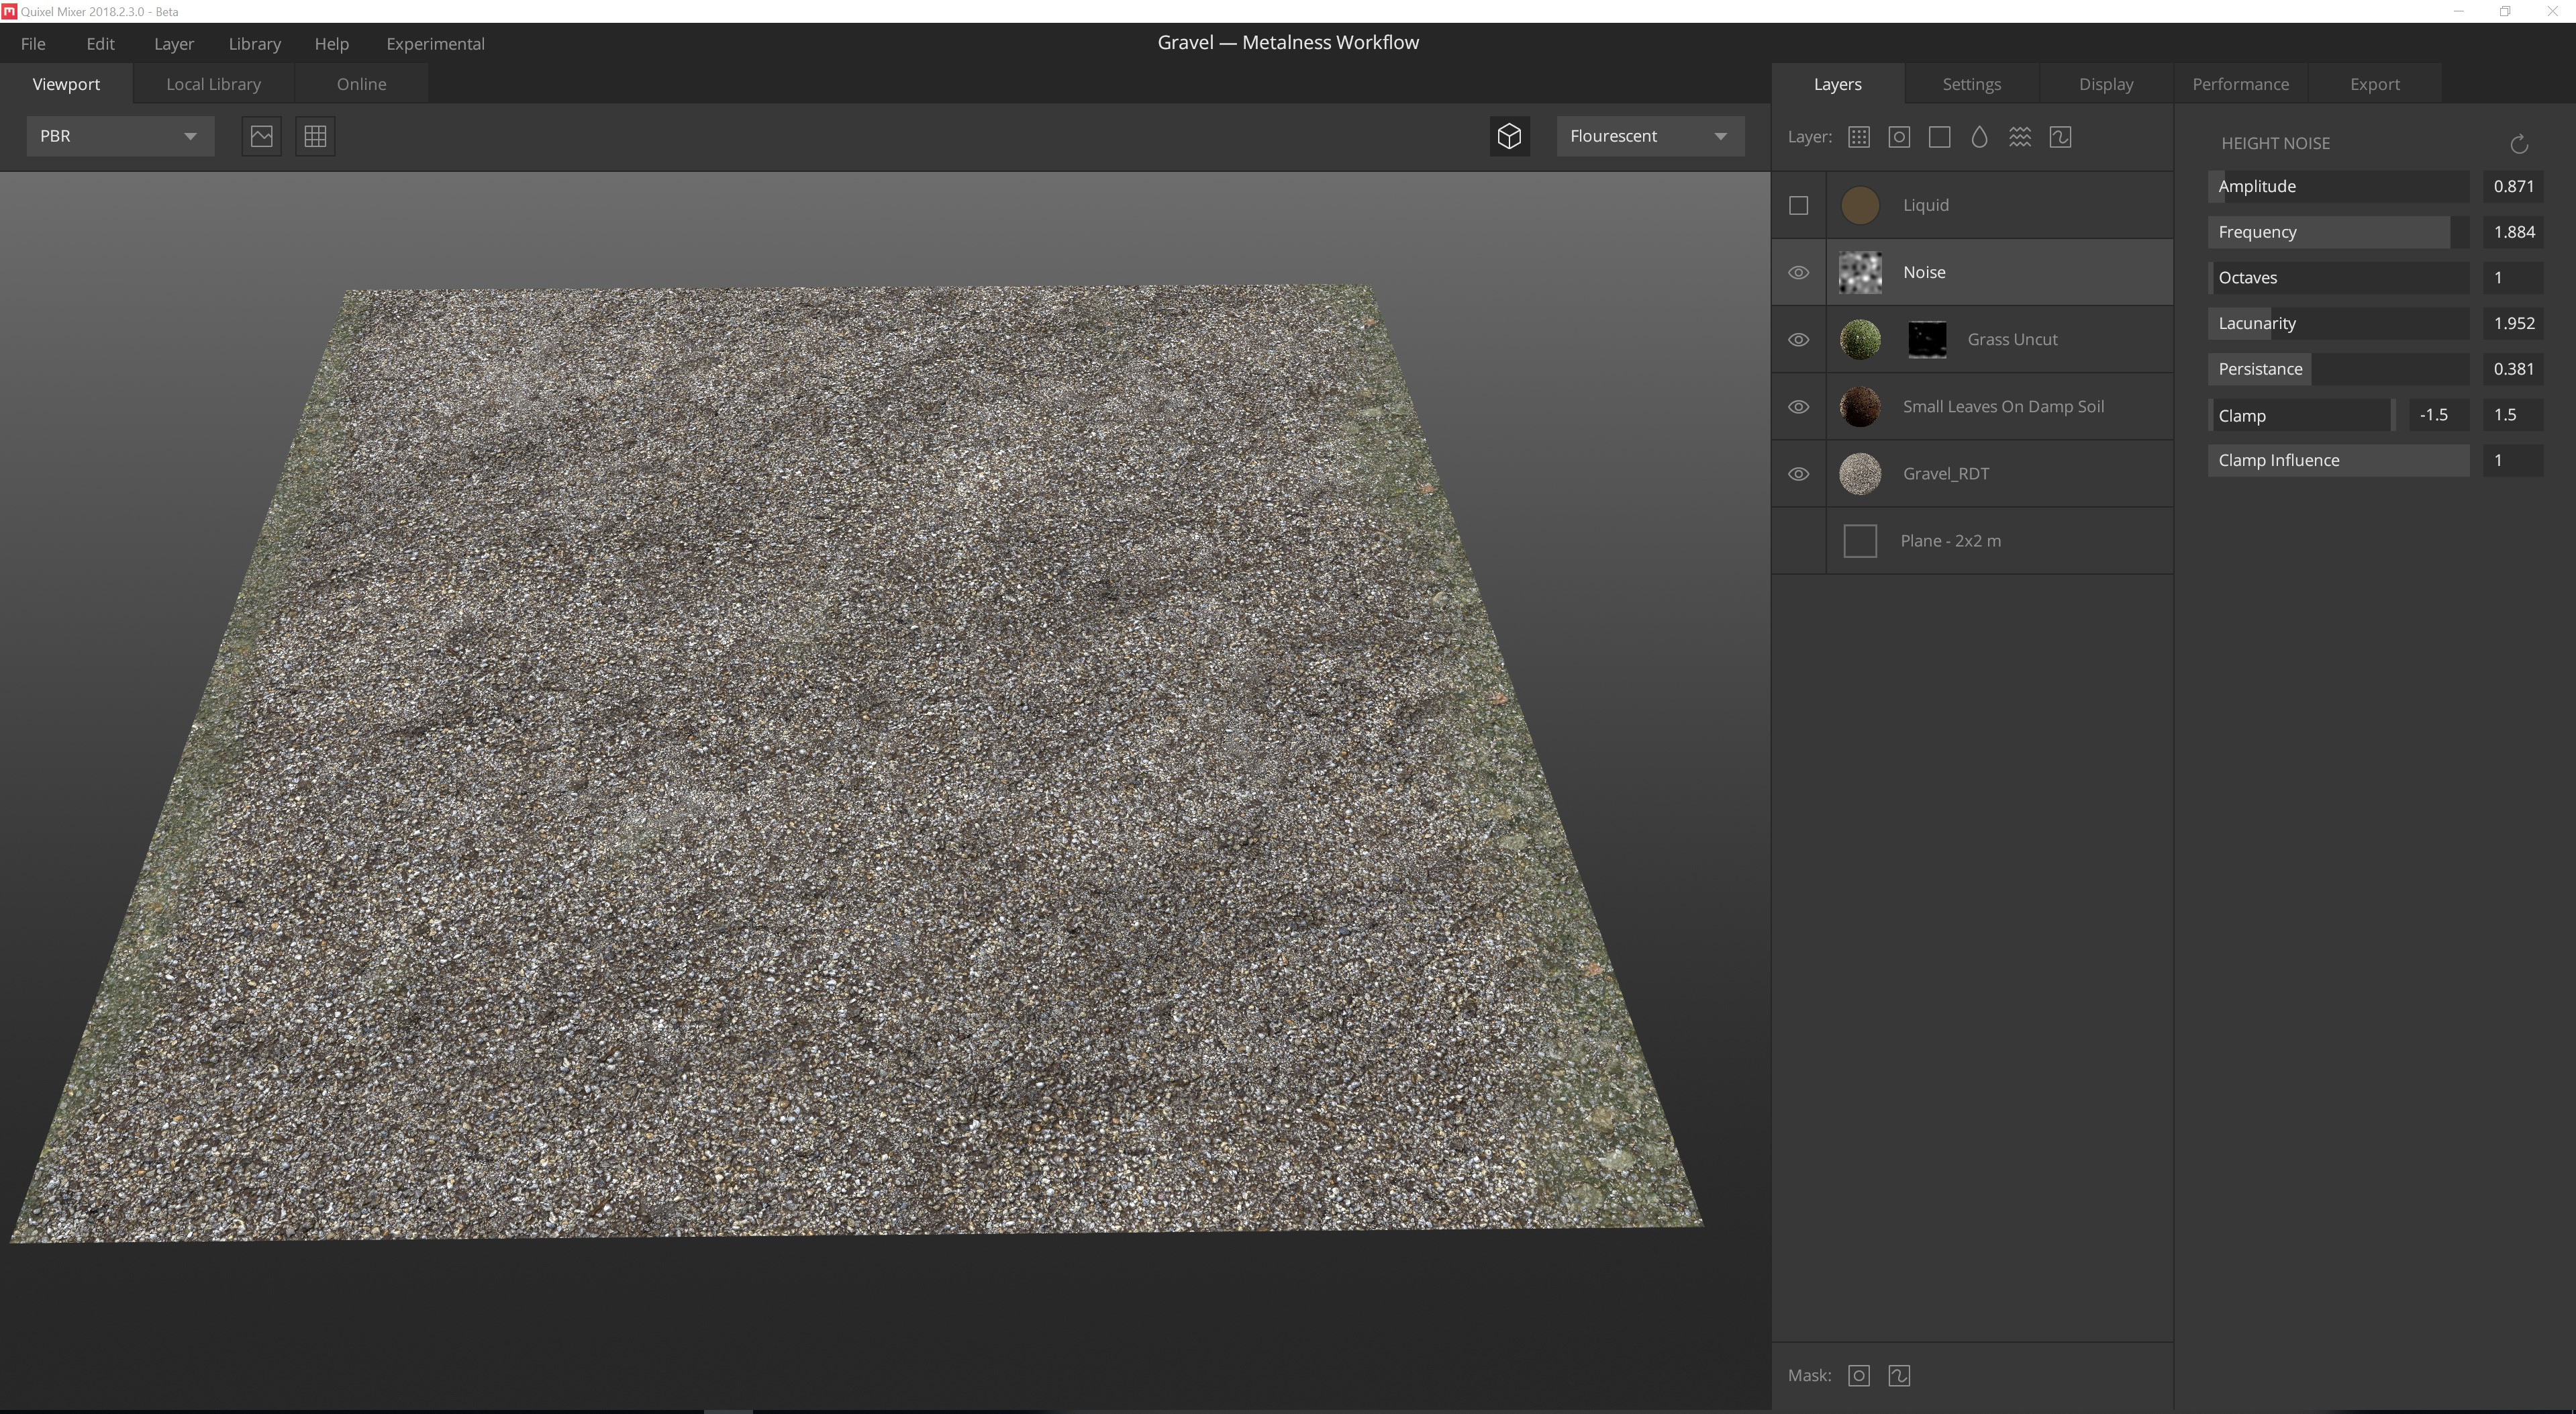 Using Quixel Mixer for my base layer for the Gravel.